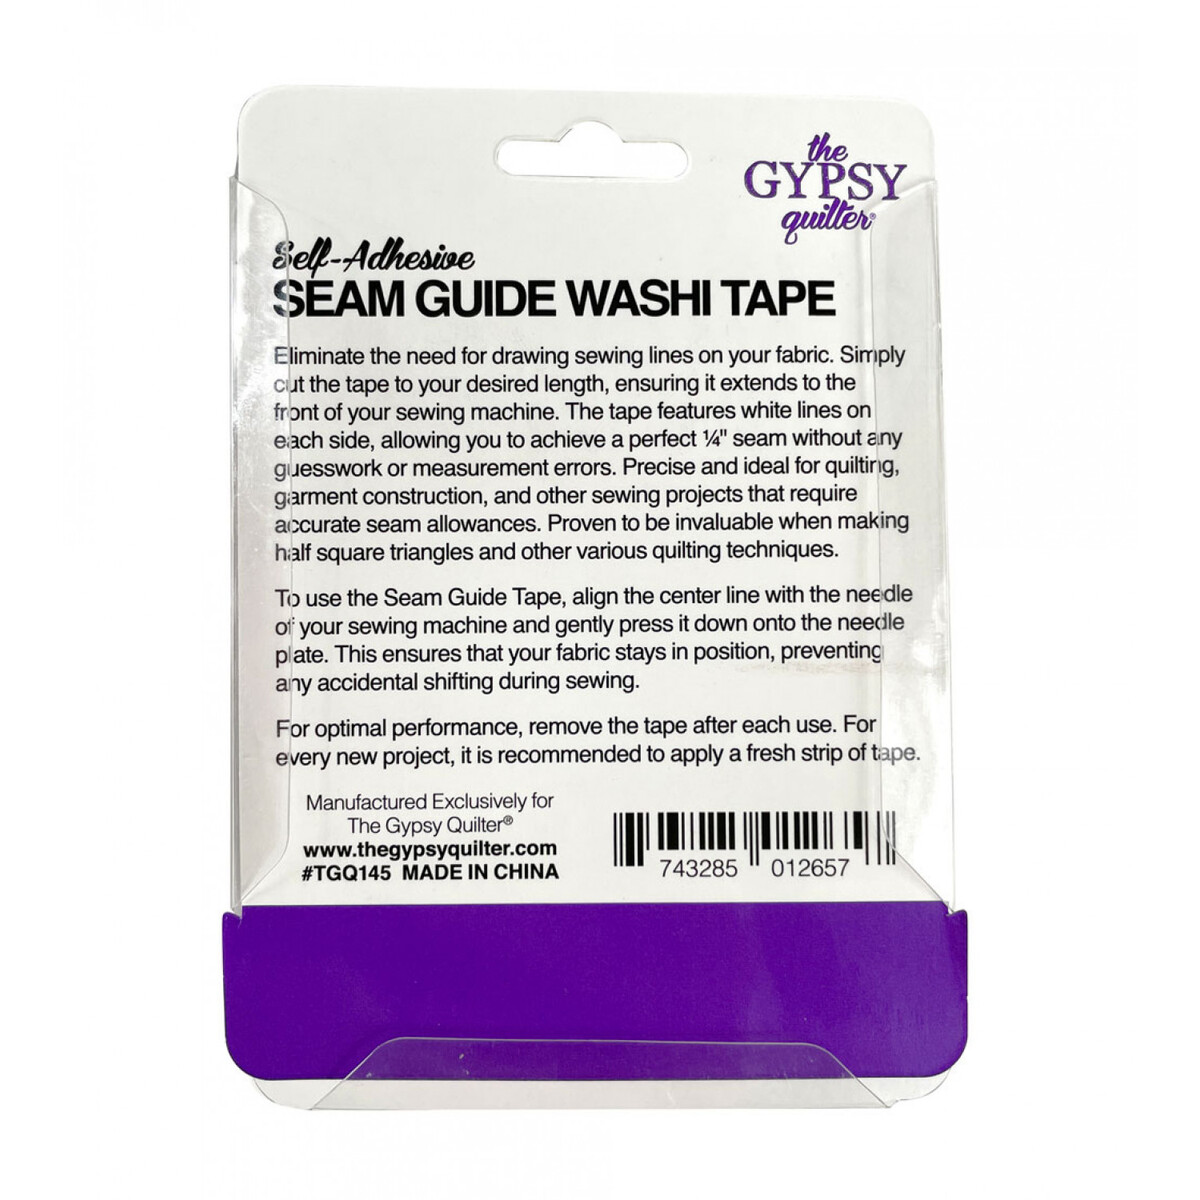 Seam Guide Washi Tape by The Gypsy Quilter - 10 yd roll